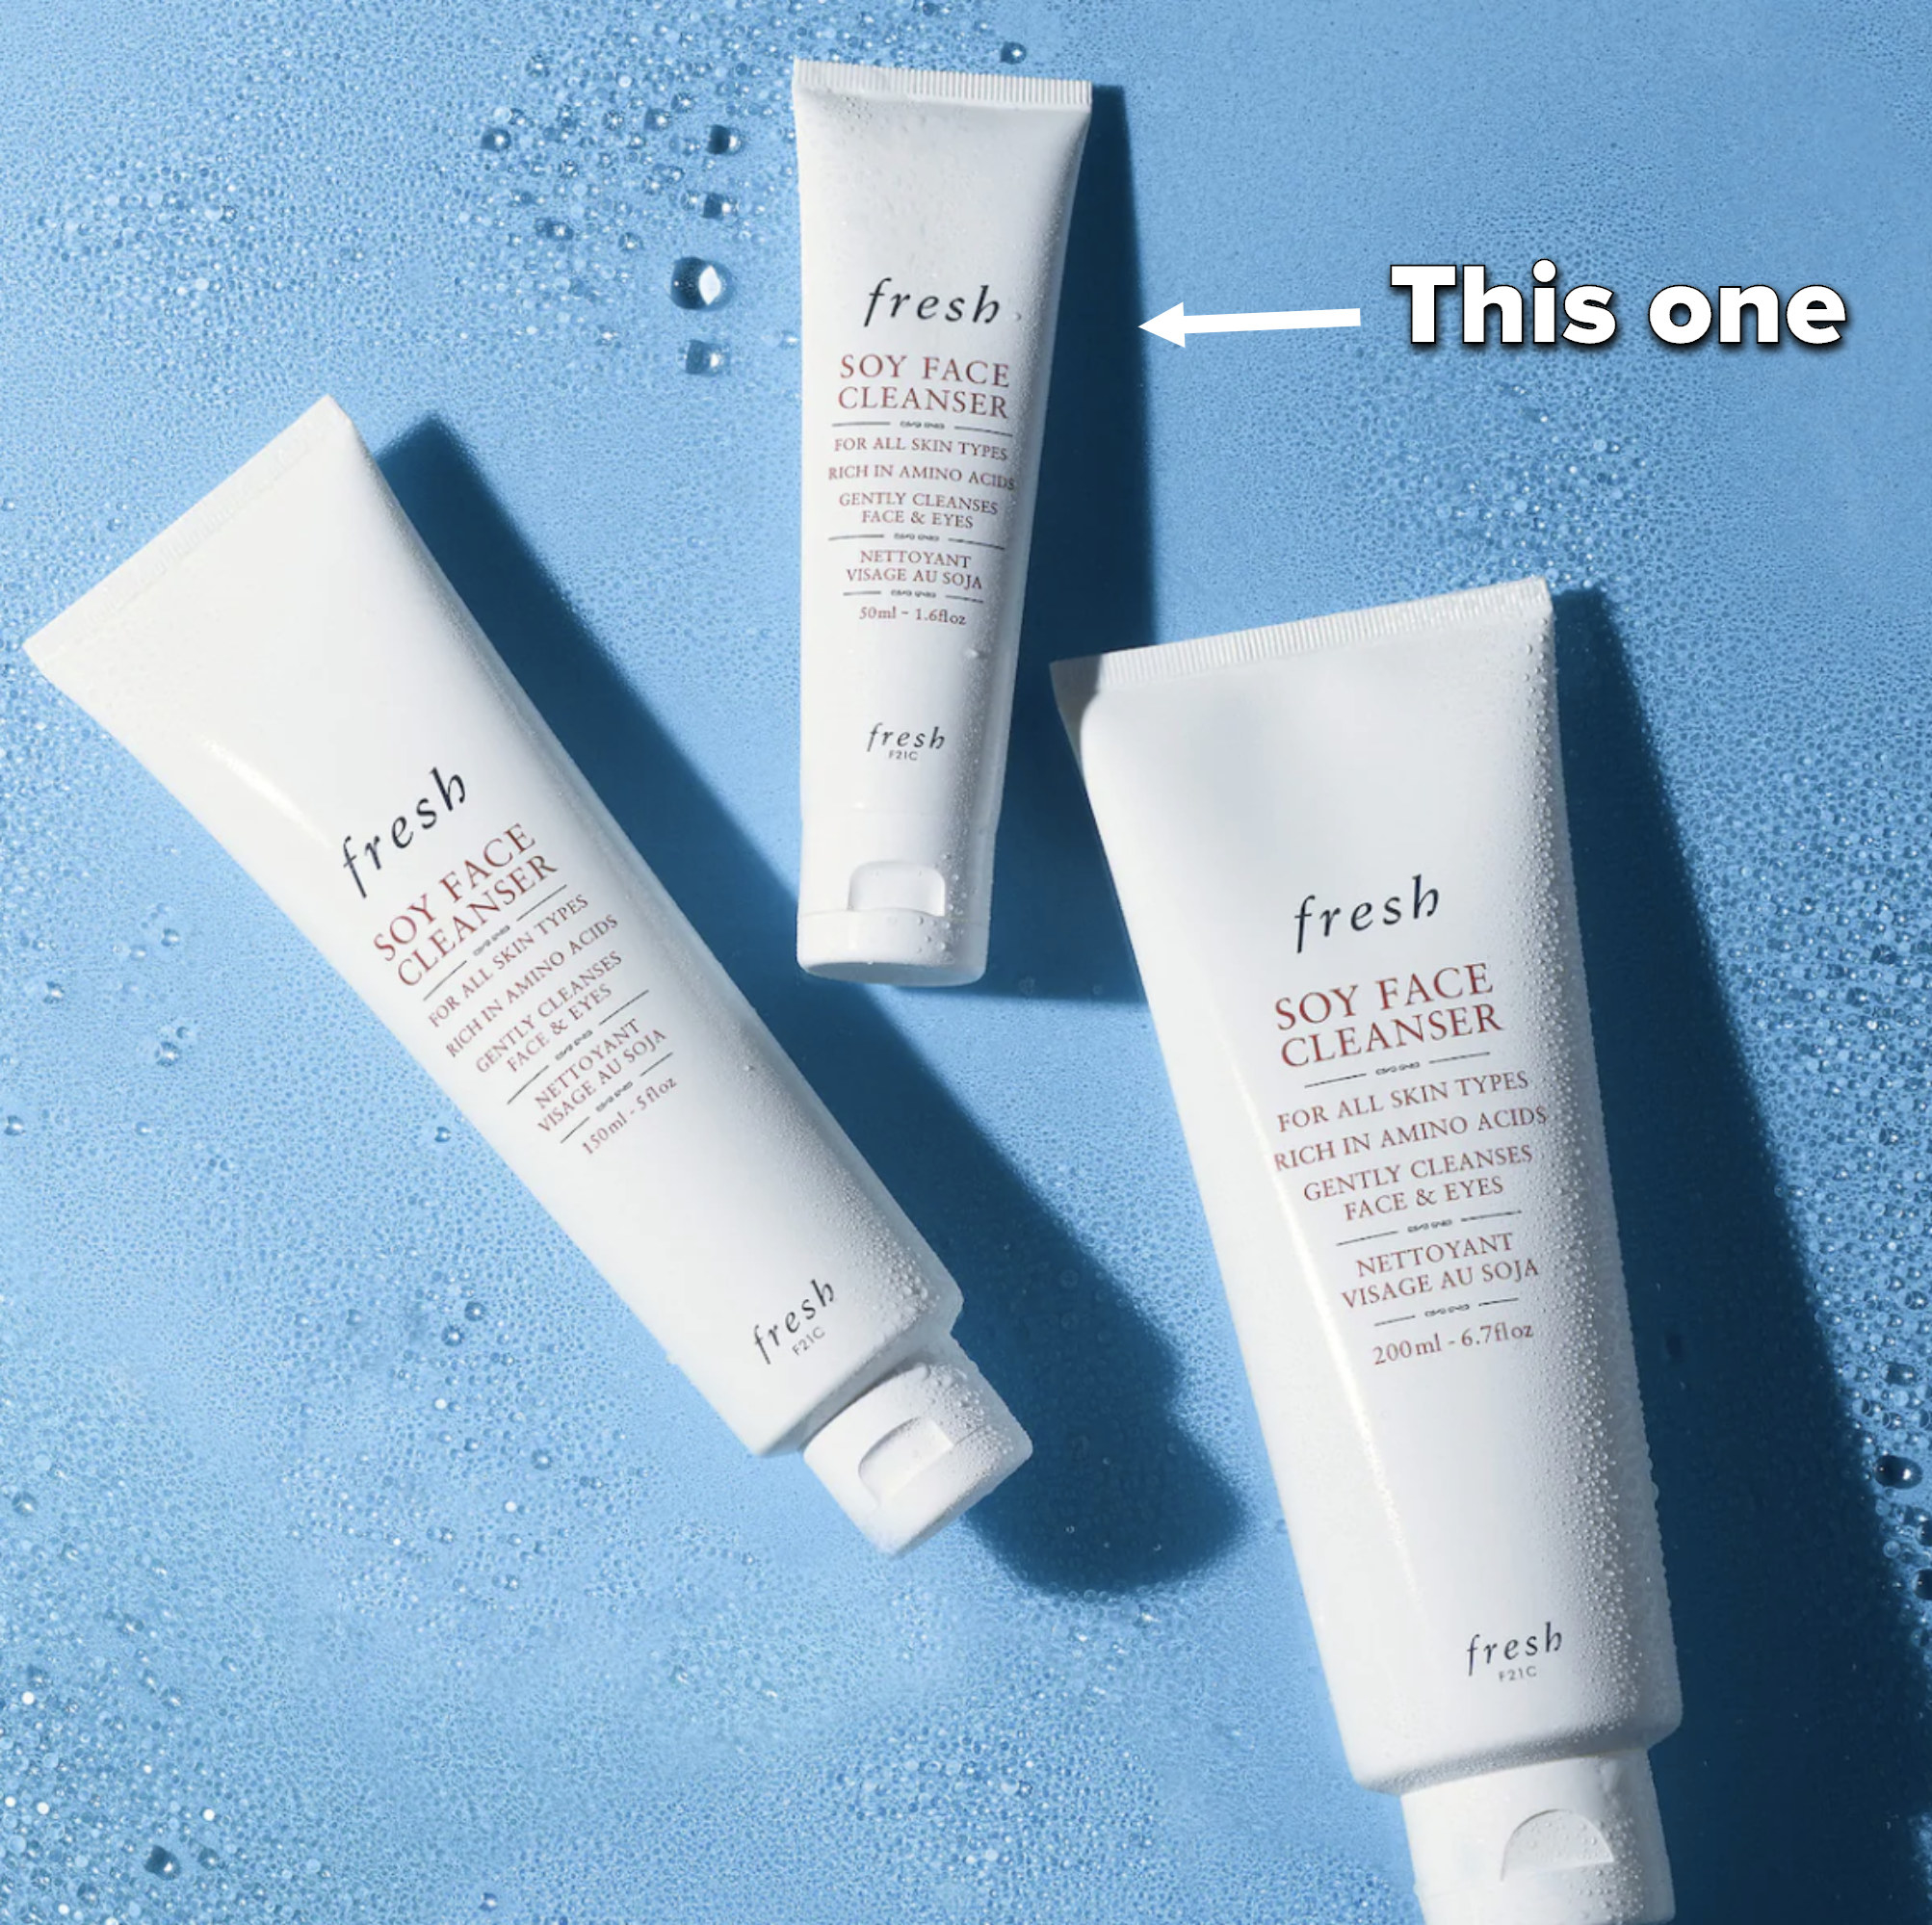 three sizes of the cleanser